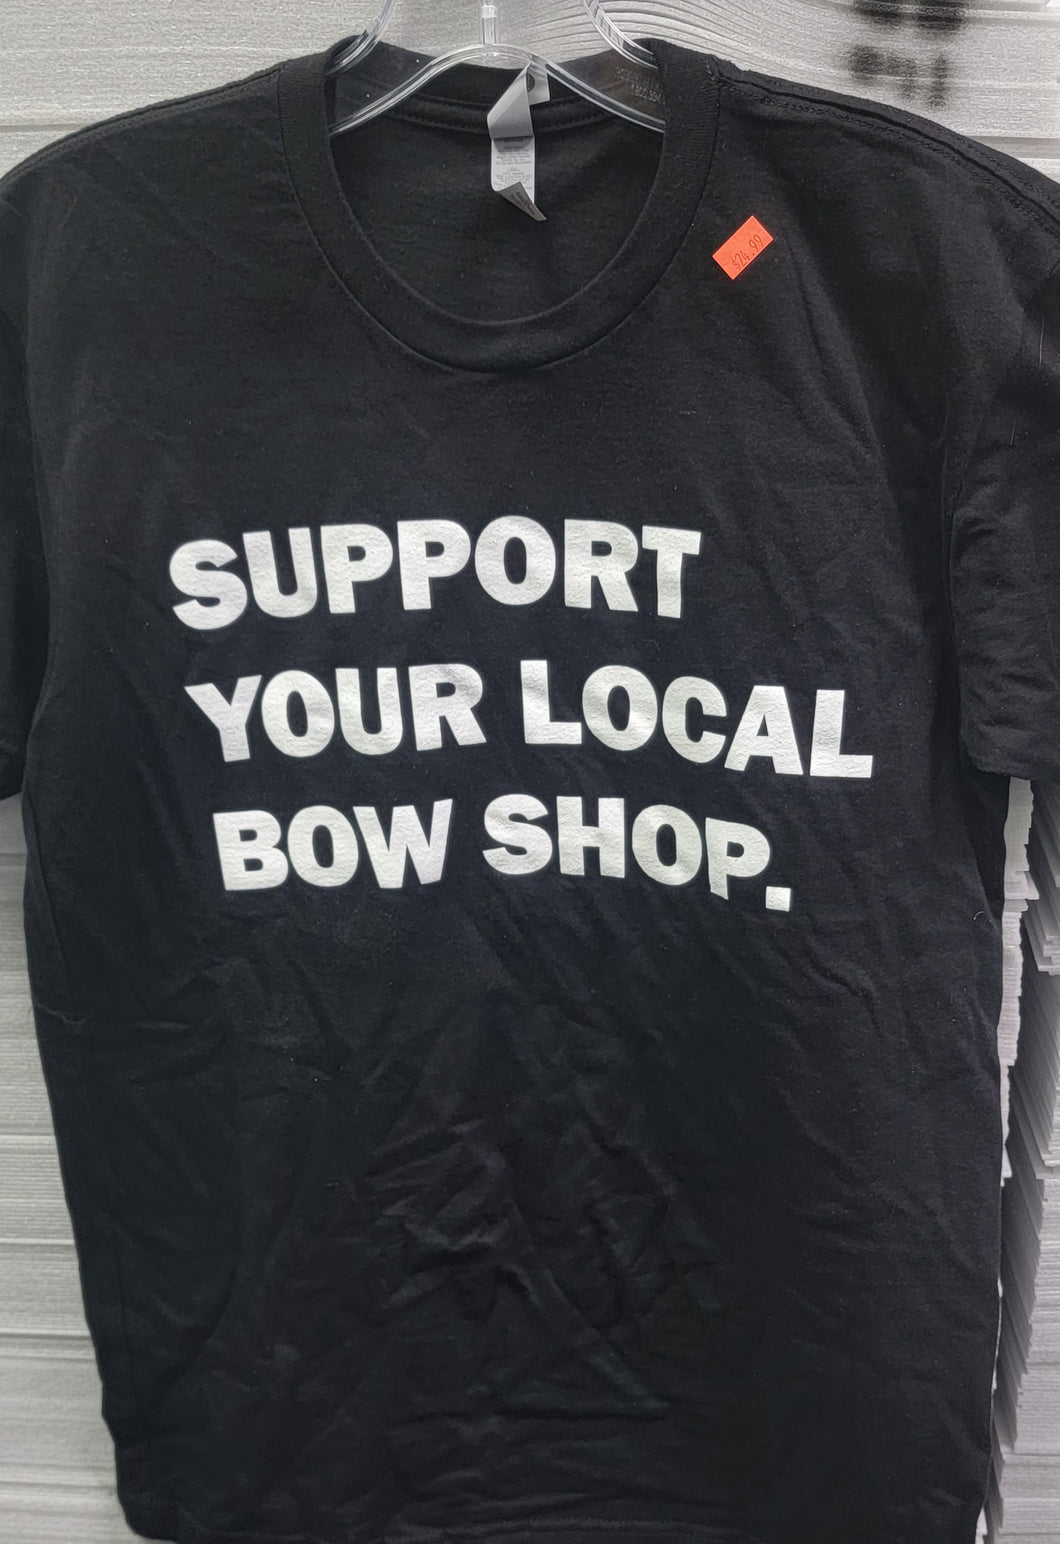 SUPPORT YOUR LOCAL BOWSHOP. T-SHIRT